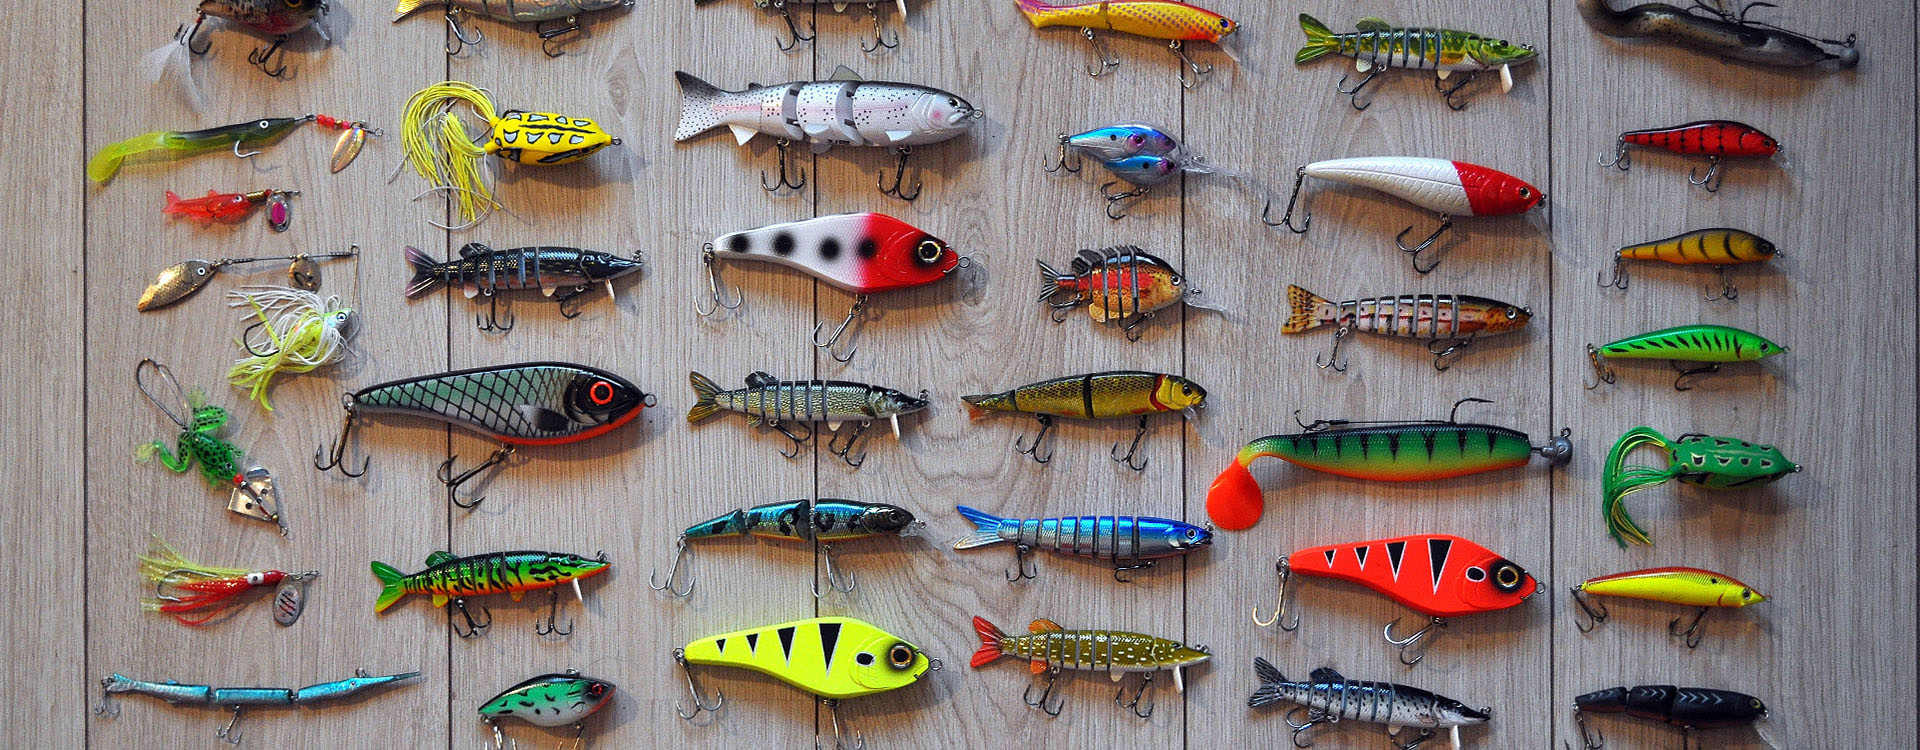 Is there any kind of fishing bait that is edible for humans? - Quora